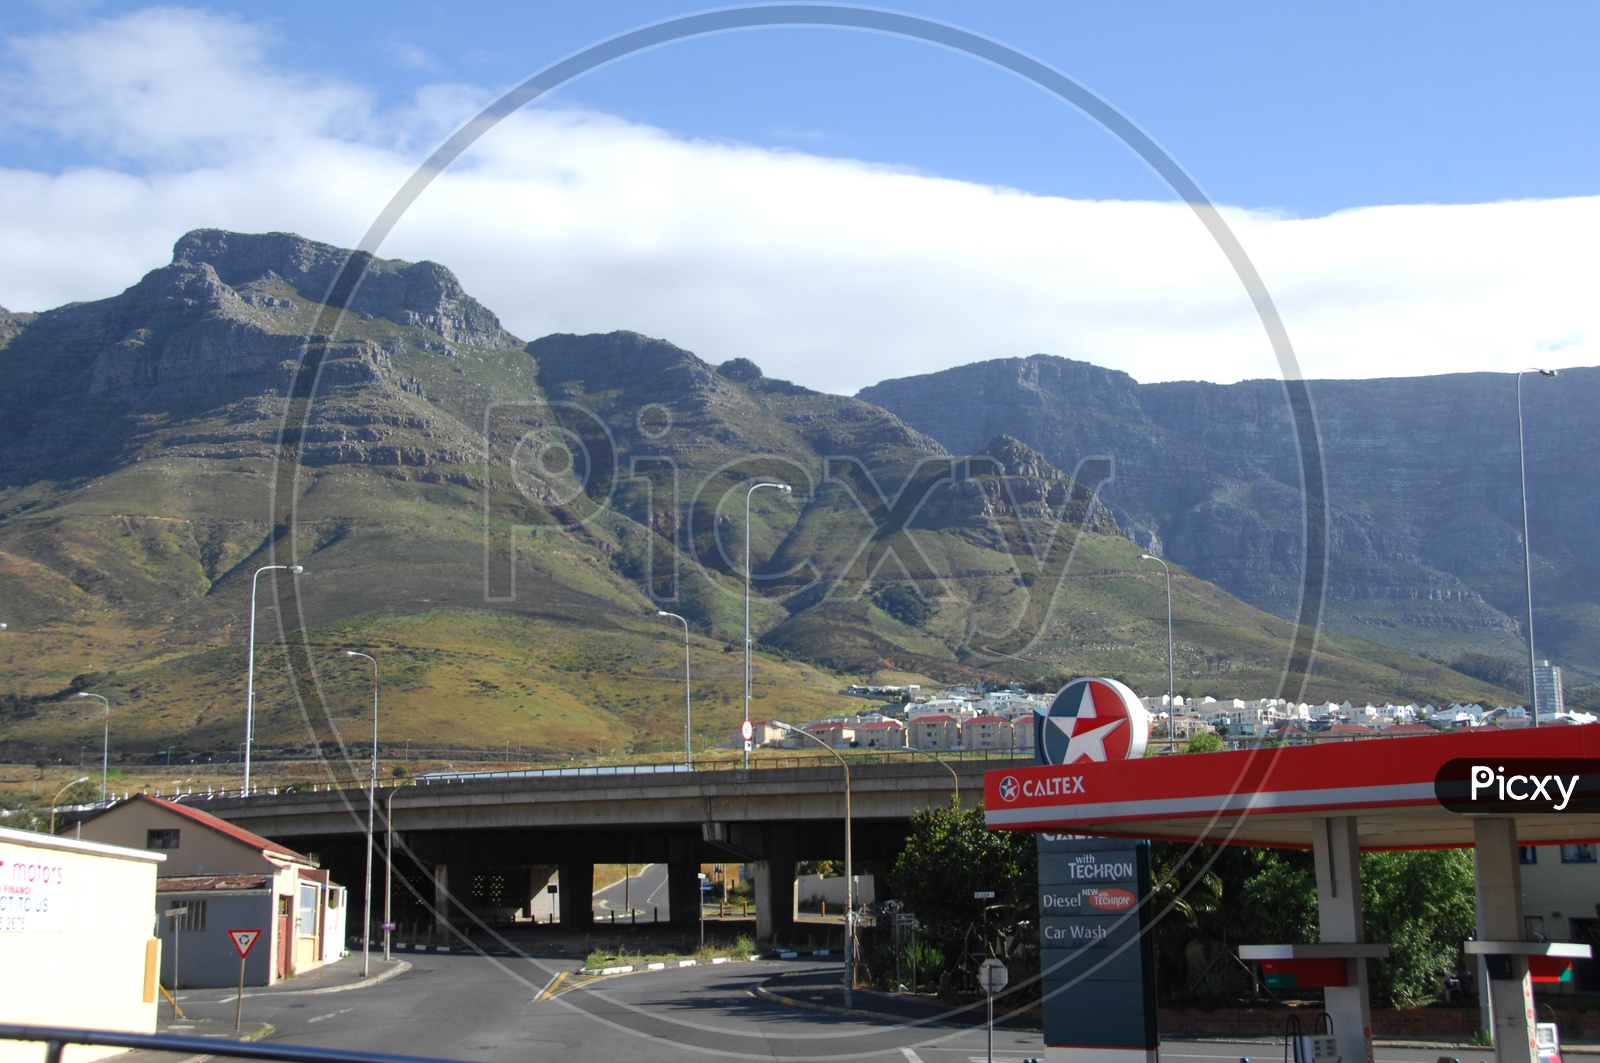 A gas filling station beside a bridge and mountains